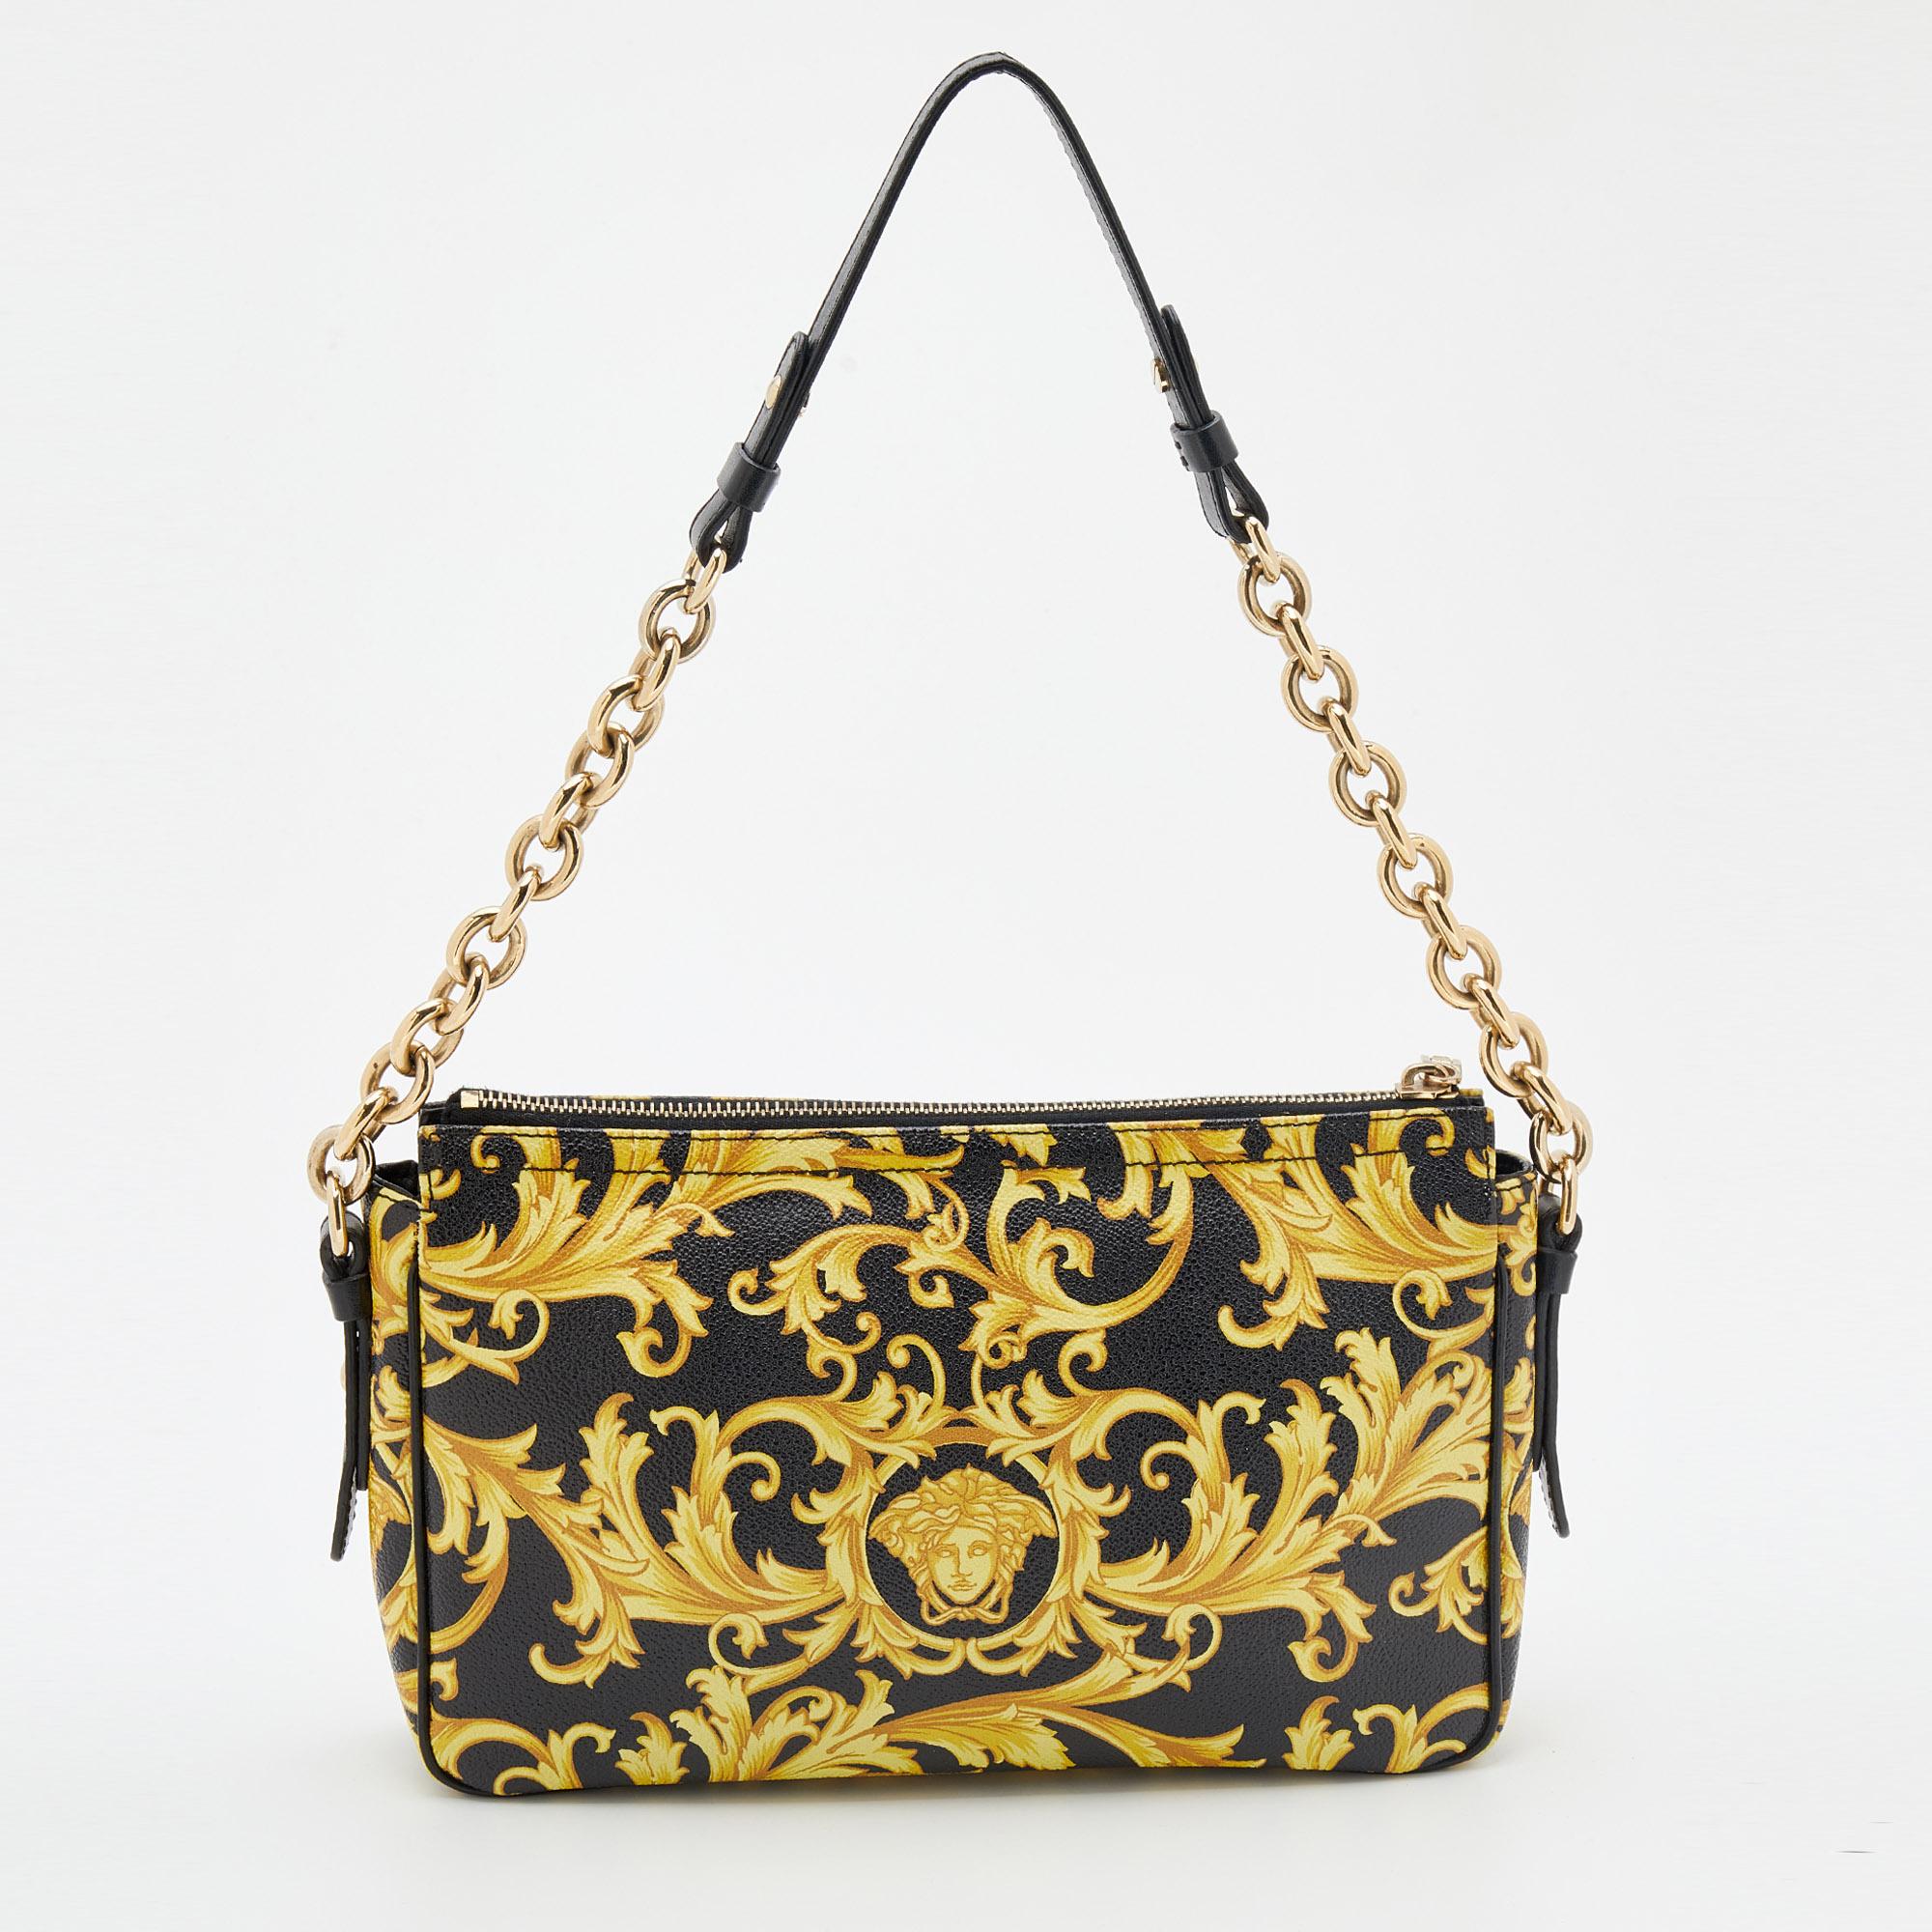 This shoulder bag from the House of Versace exudes the right amount of class and elegance. Crafted from black-yellow Barocco Medusa printed leather, this bag is adorned with a chain strap and gold-toned hardware. It accommodates a roomy interior.